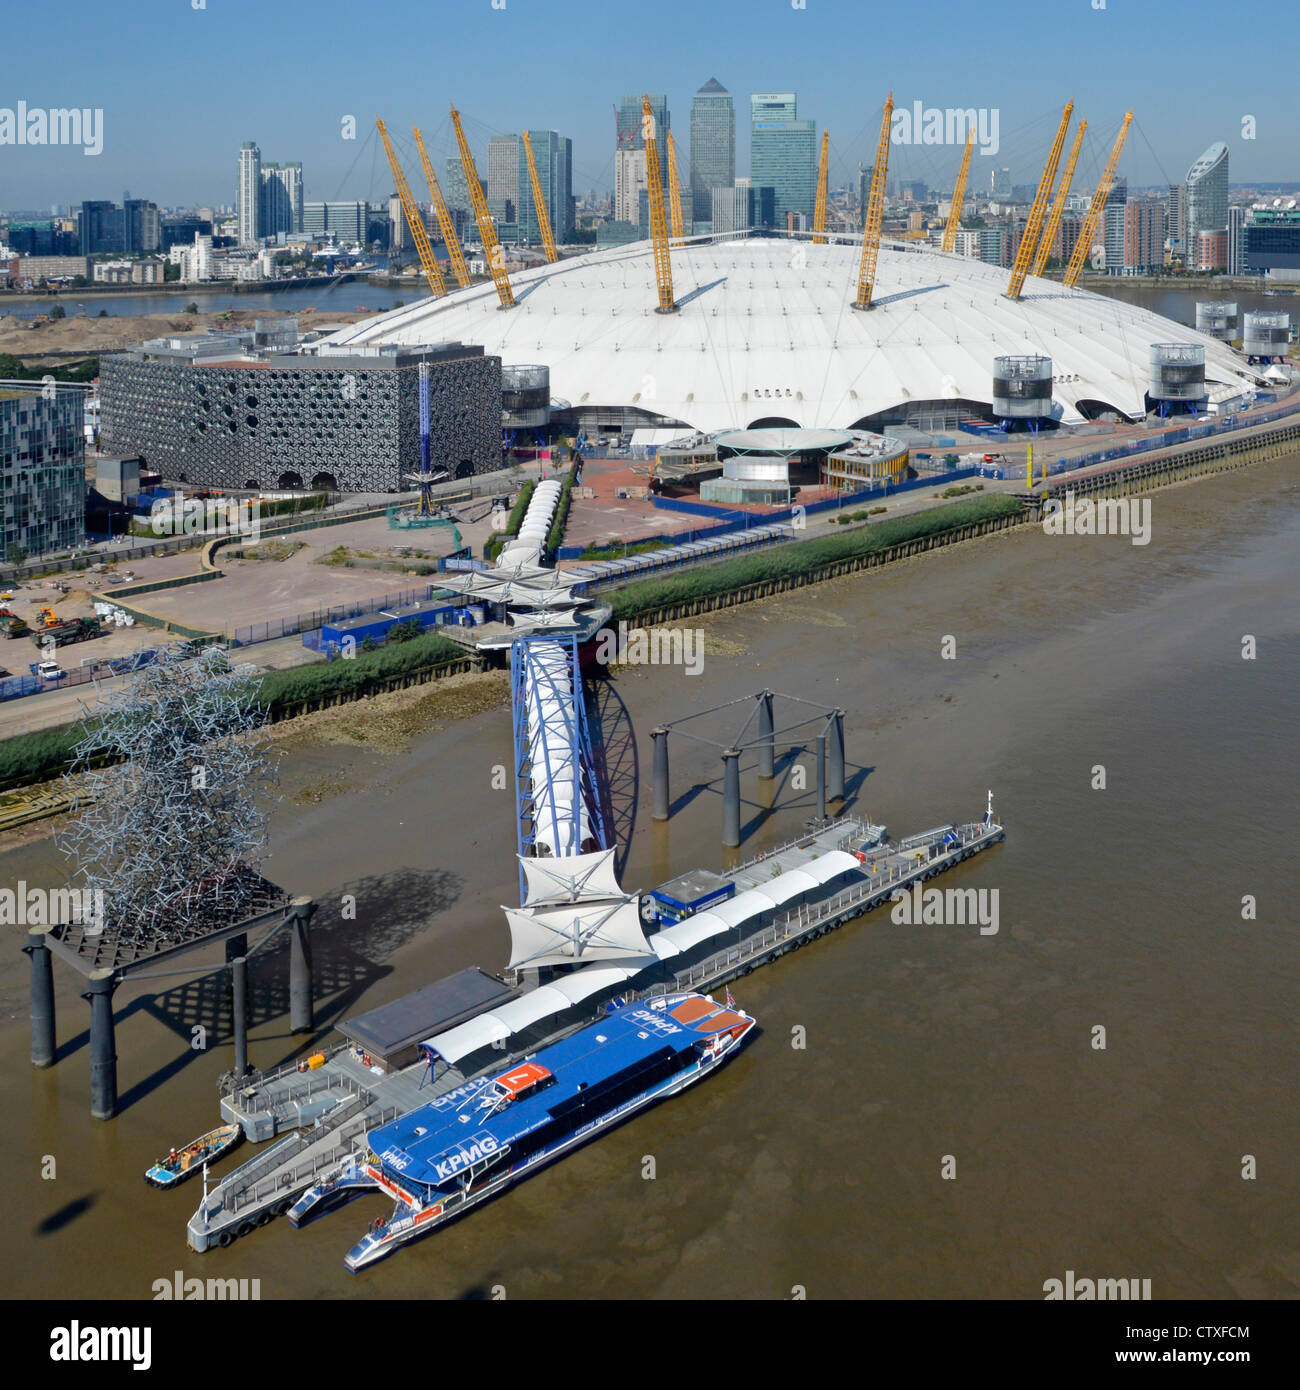 Aerial view of North Greenwich Peninsula & Pier Thames Clipper river bus beside O2 arena millenium dome 2000 & Canary Wharf skyline beyond London UK Stock Photo